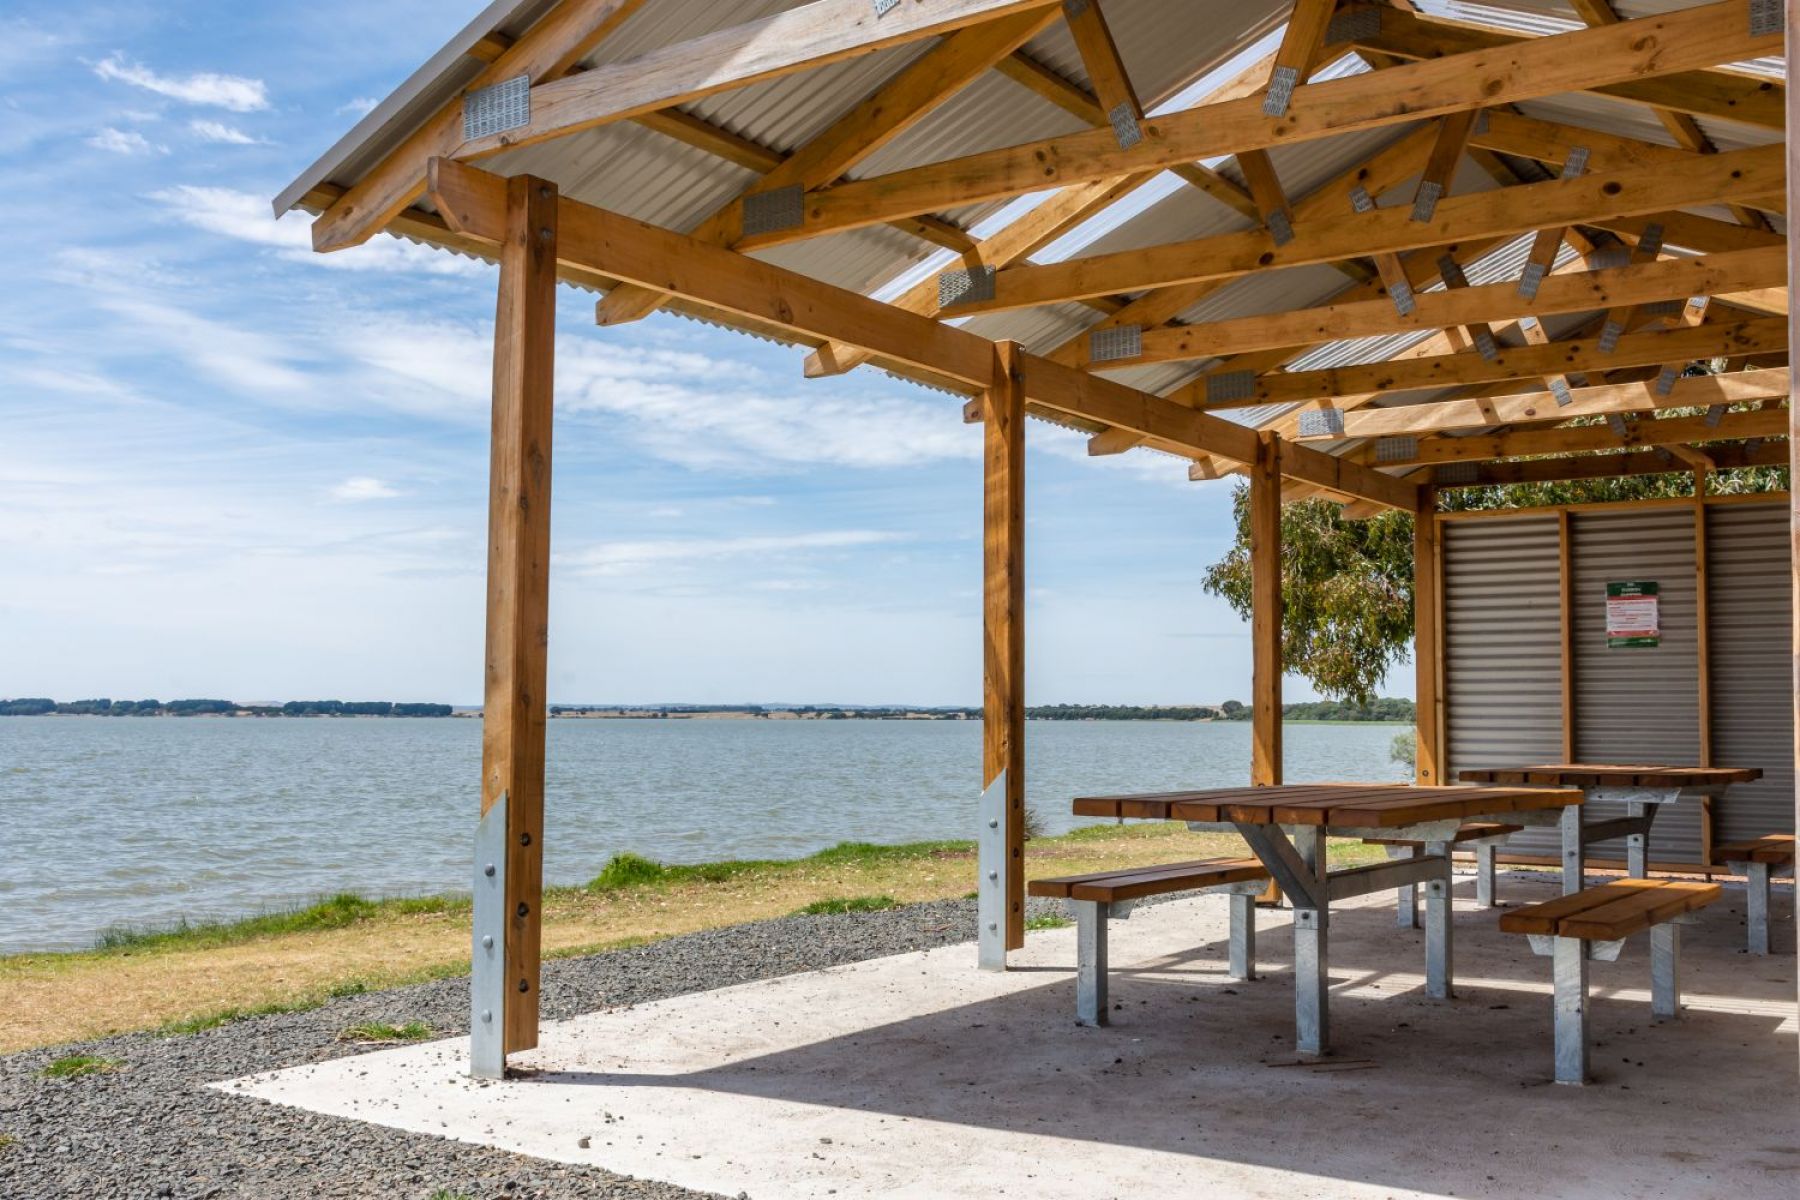 A picnic shelter looking over a lake on a sunny day.